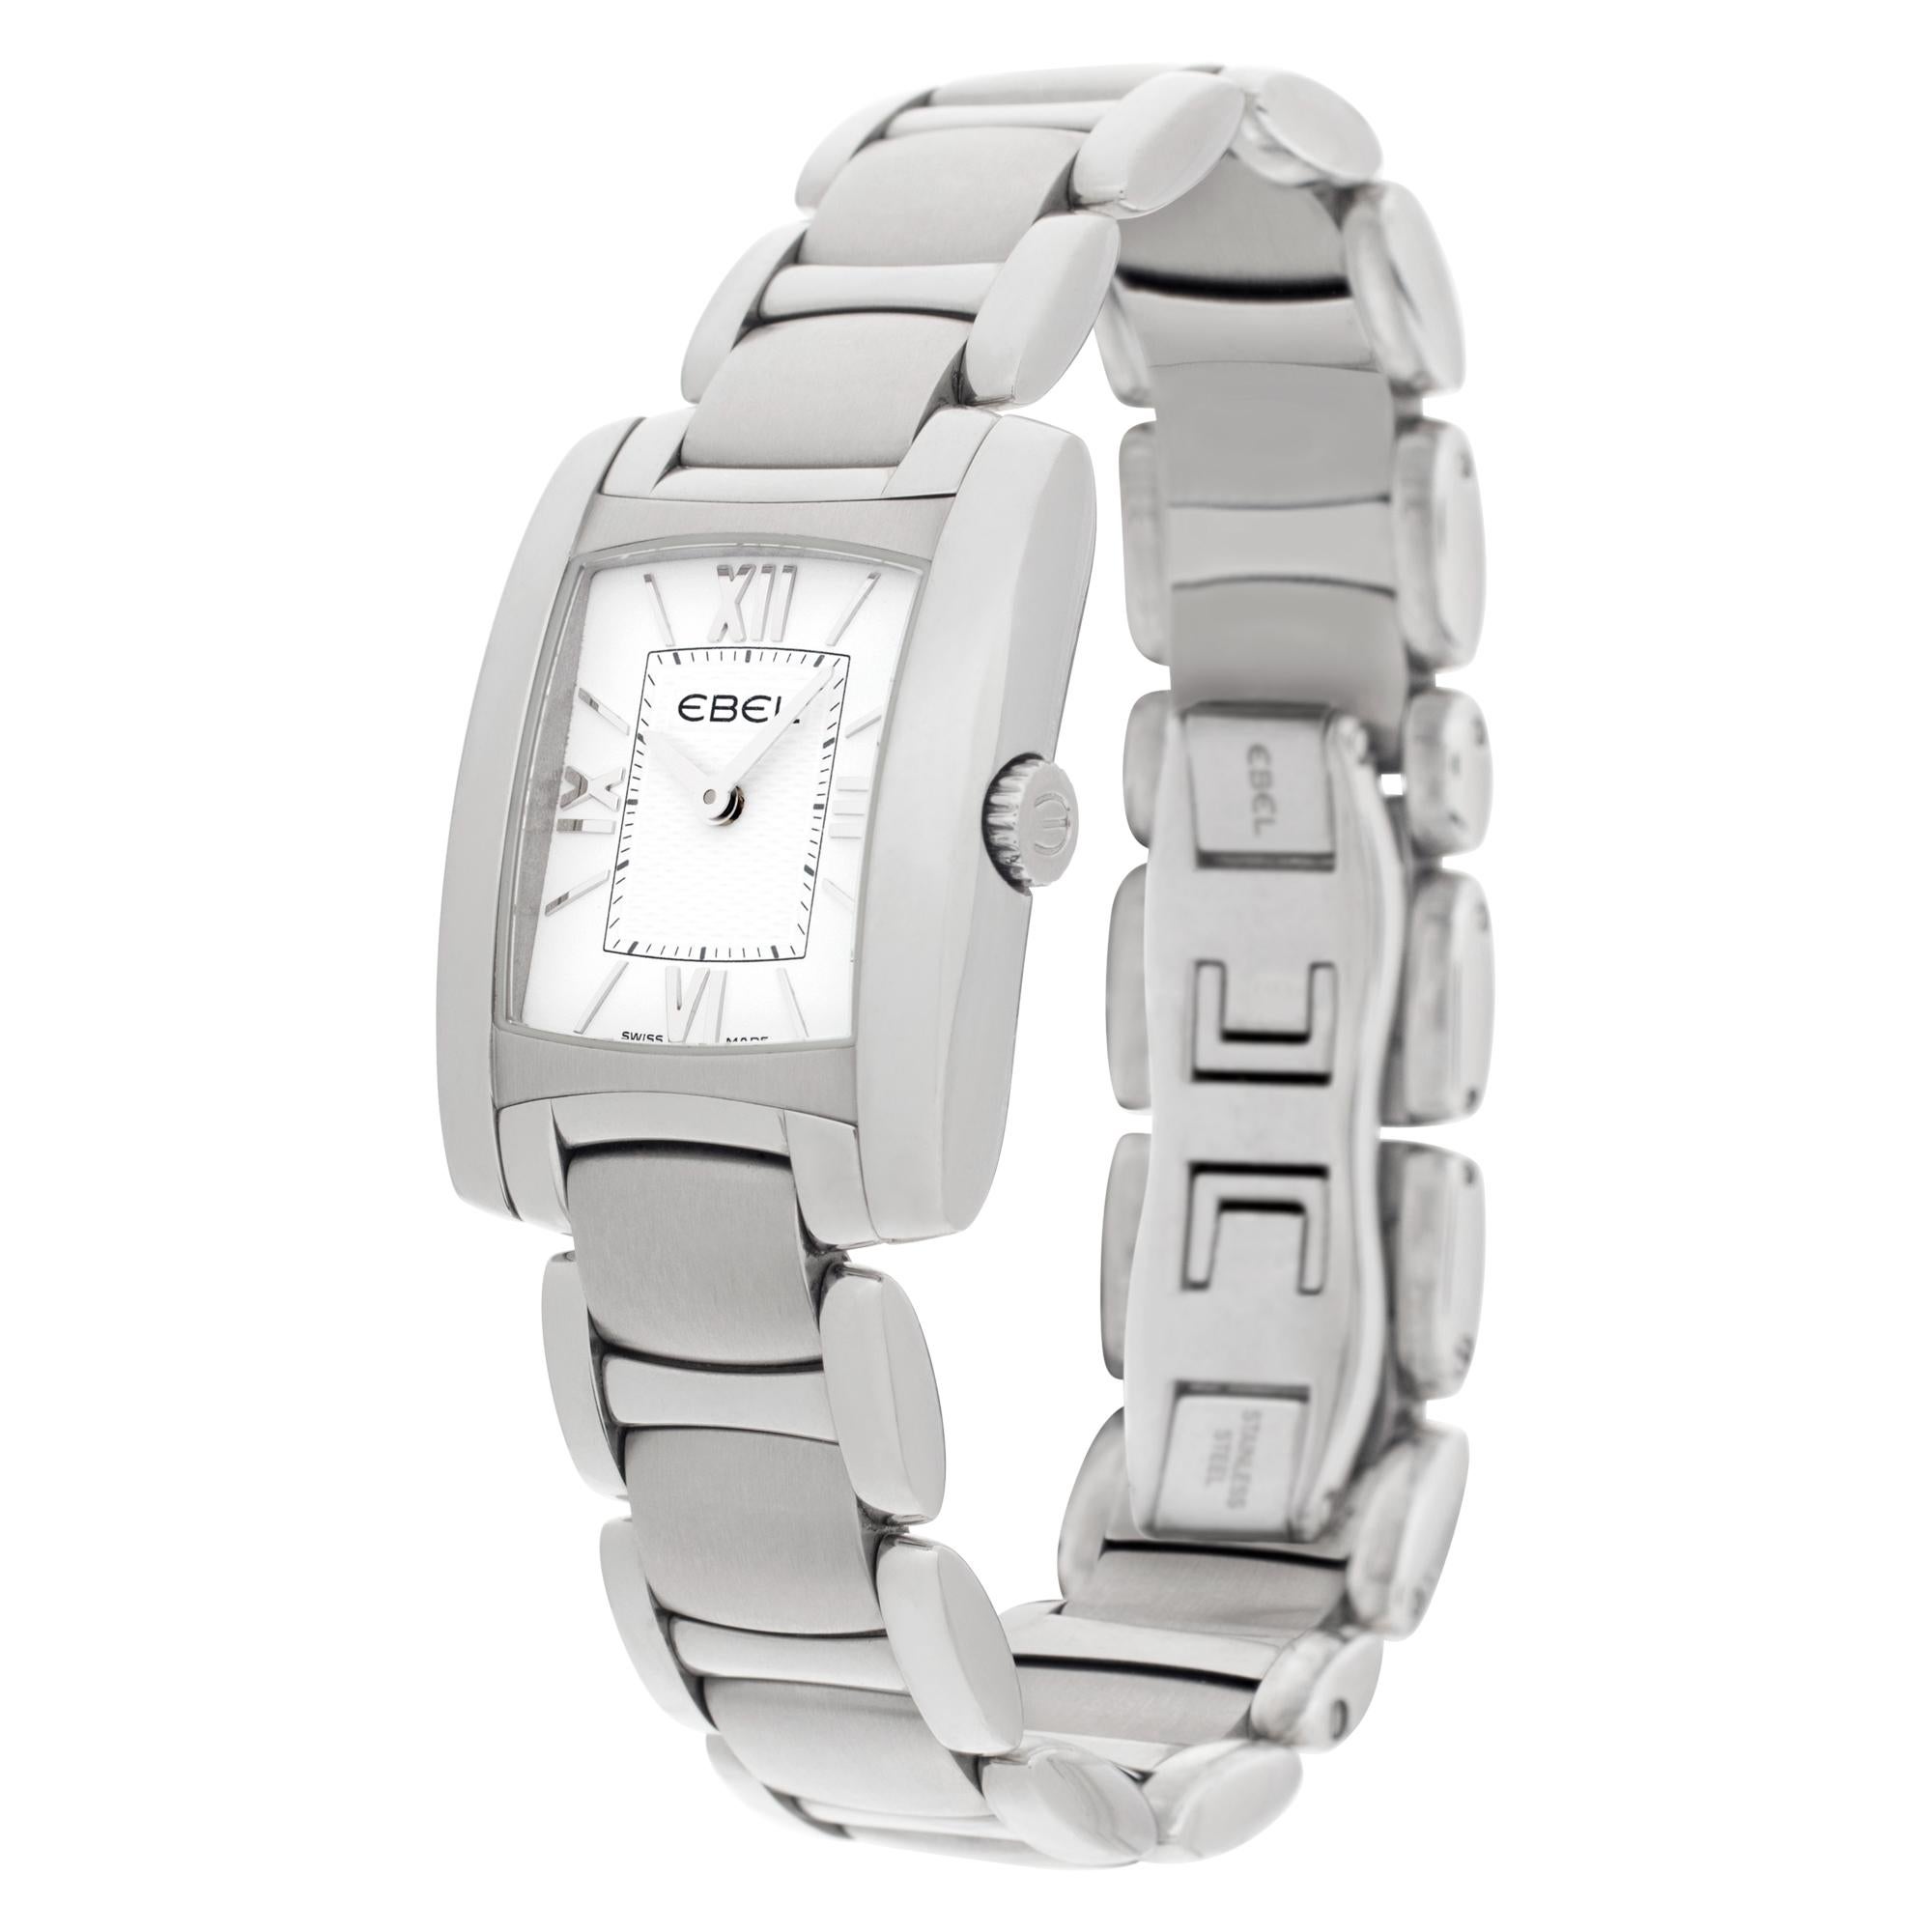 Ebel Brasilia in stainless steel. Quartz. 24 mm case size. With box and papers. Ref 9976M22. Fine Pre-owned Ebel Watch.

Certified preowned Dress Ebel Brasilia 9976M22 watch is made out of Stainless steel on a Stainless Steel bracelet with a